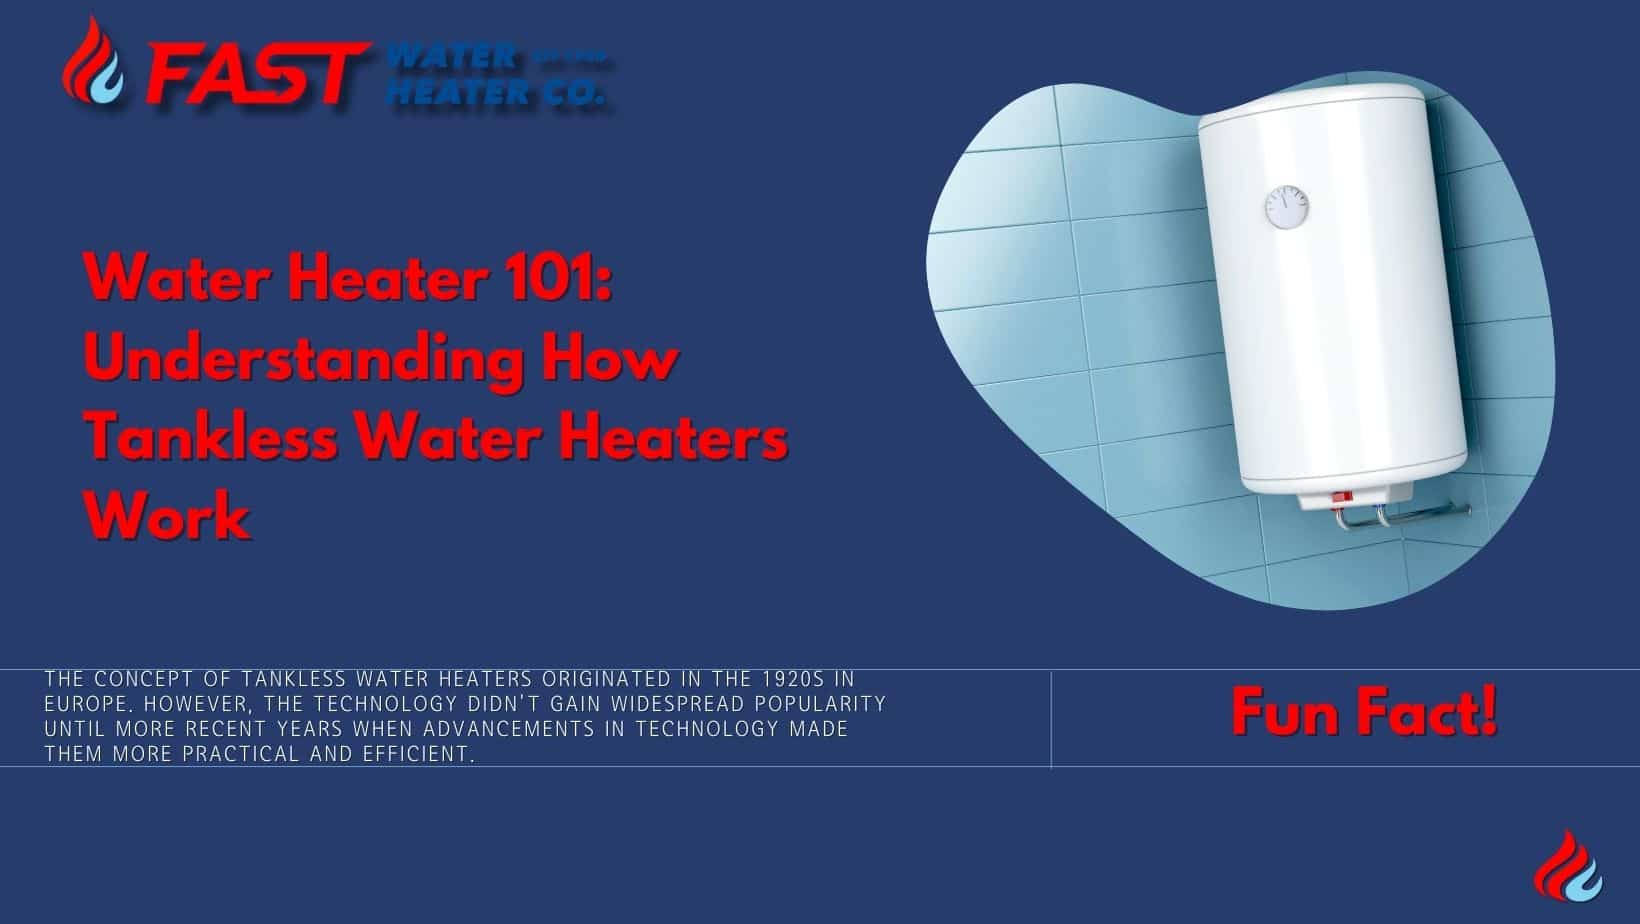 The concept of tankless water heaters originated in the 1920s in Europe. However, the technology didn't gain widespread popularity until more recent years when advancements in technology made them more practical and efficient.